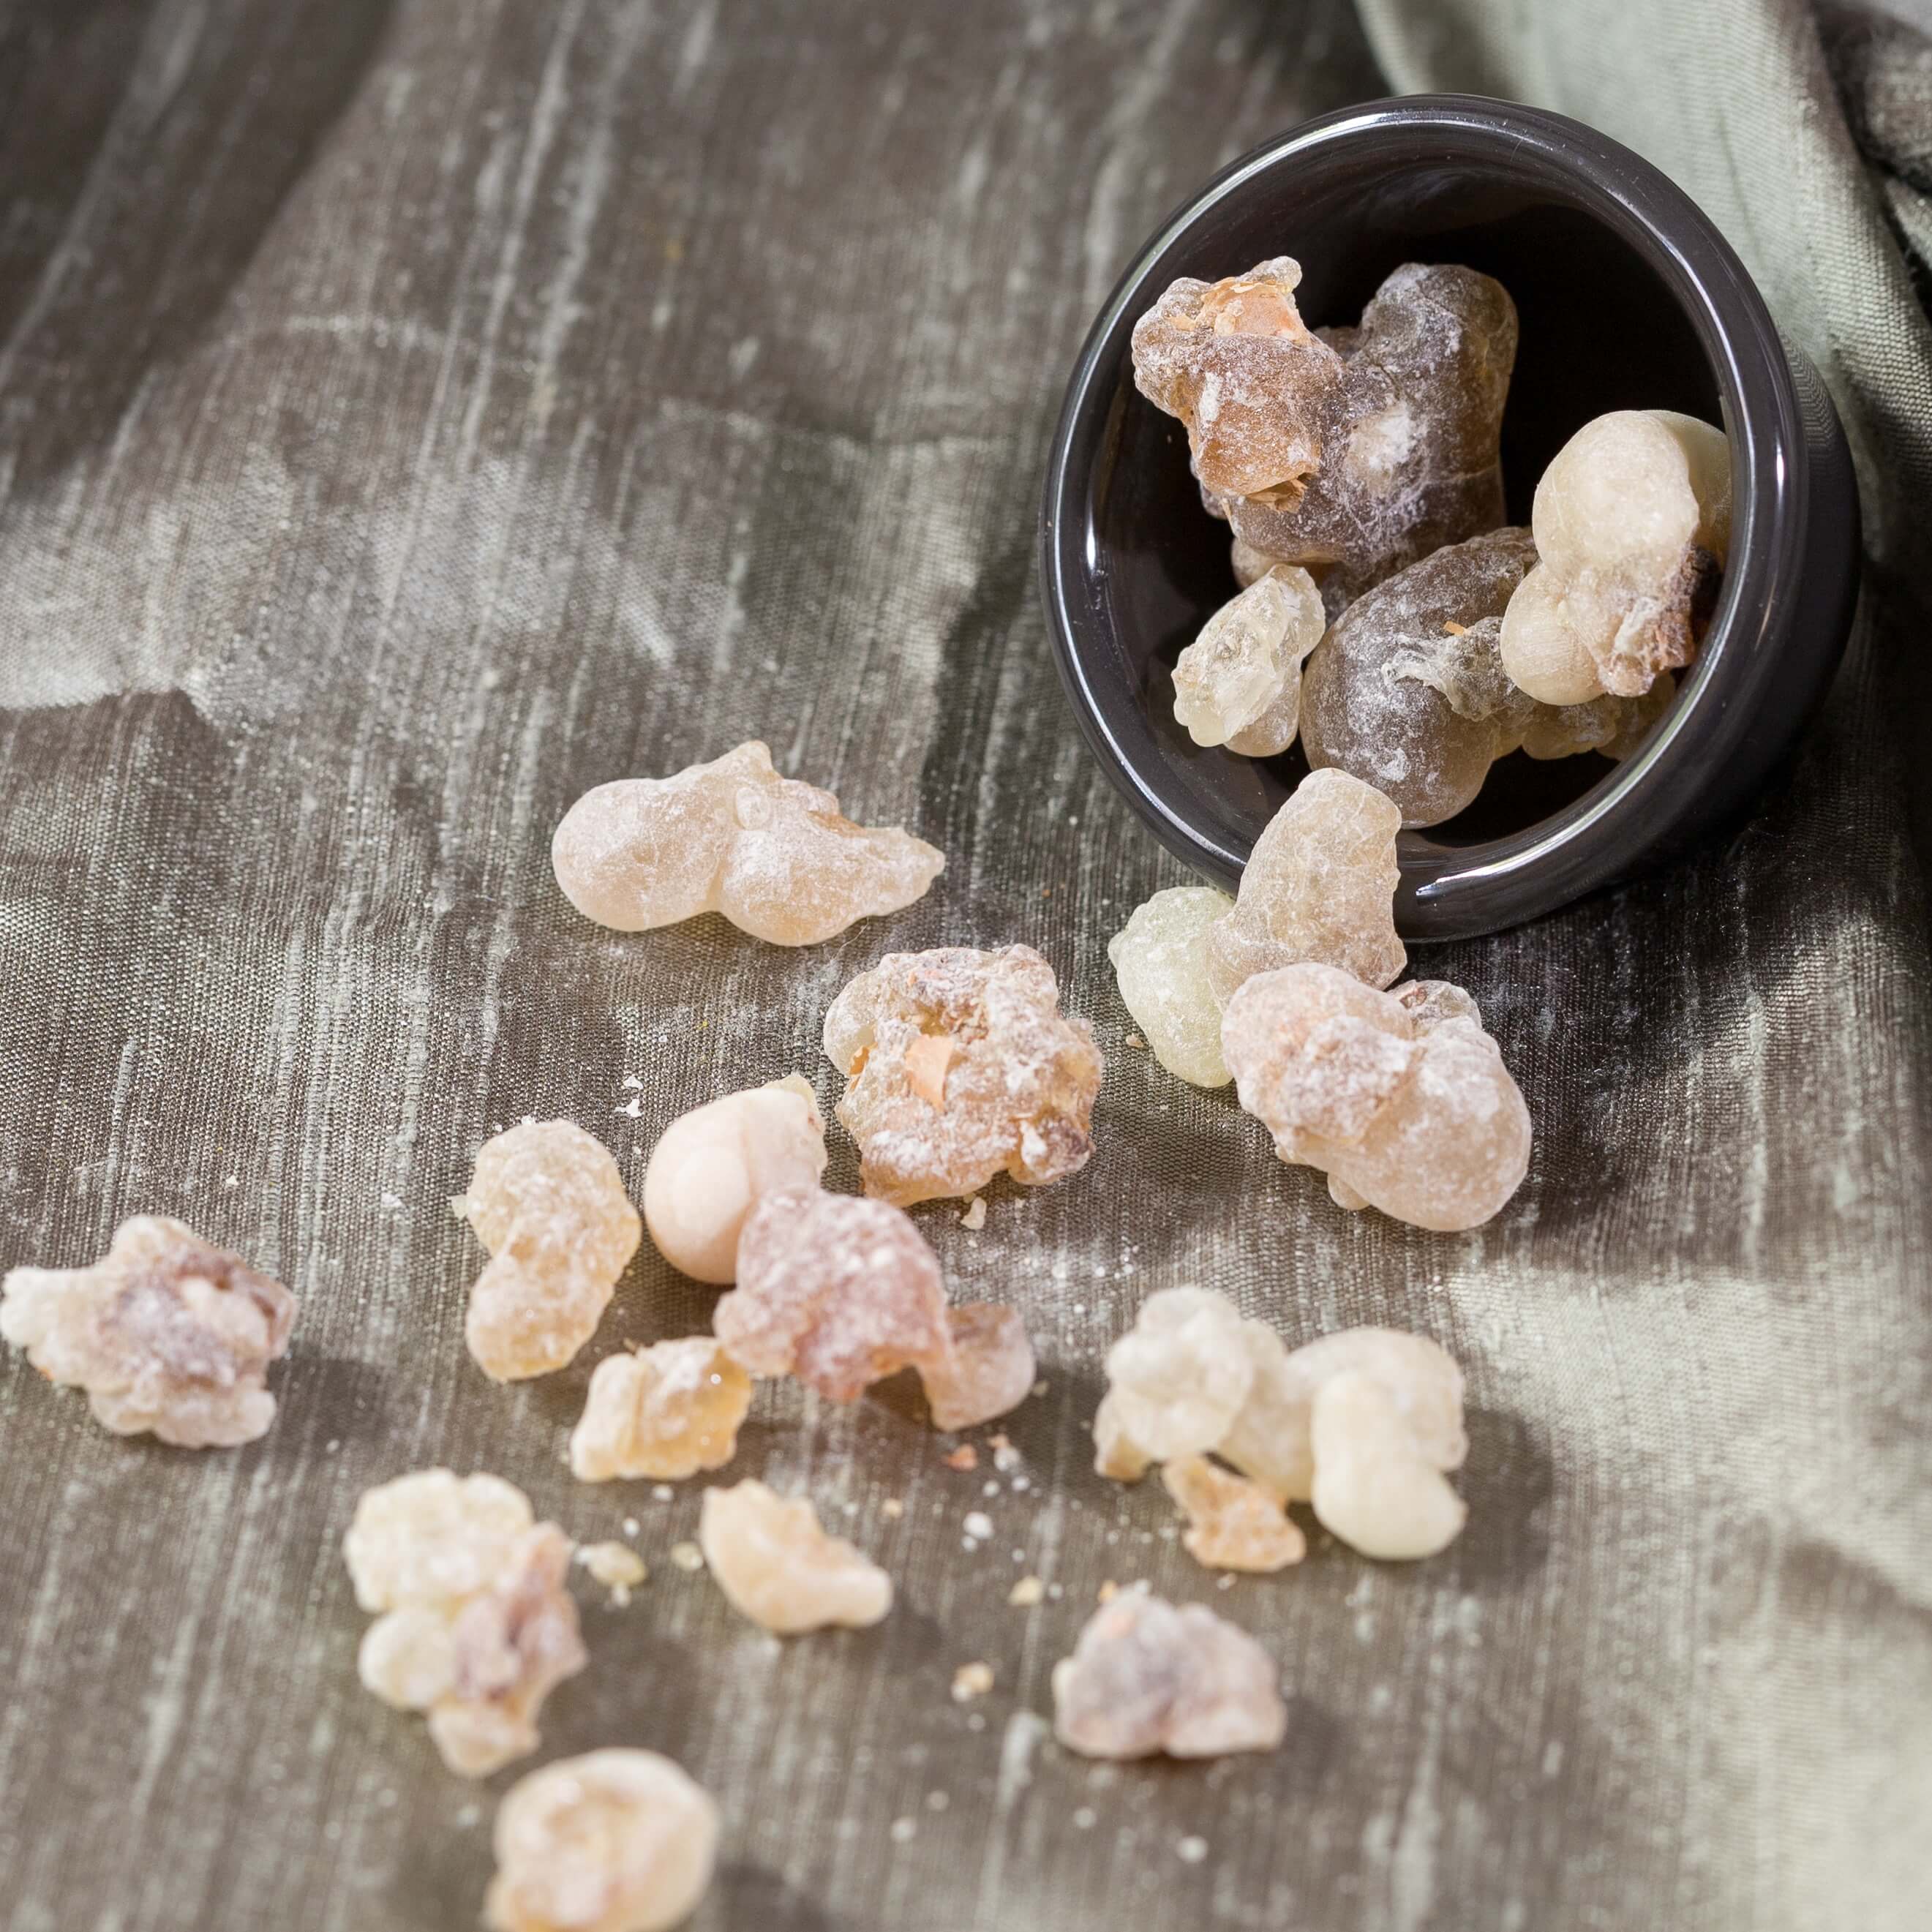 Frankincense Oil - Health Simplified